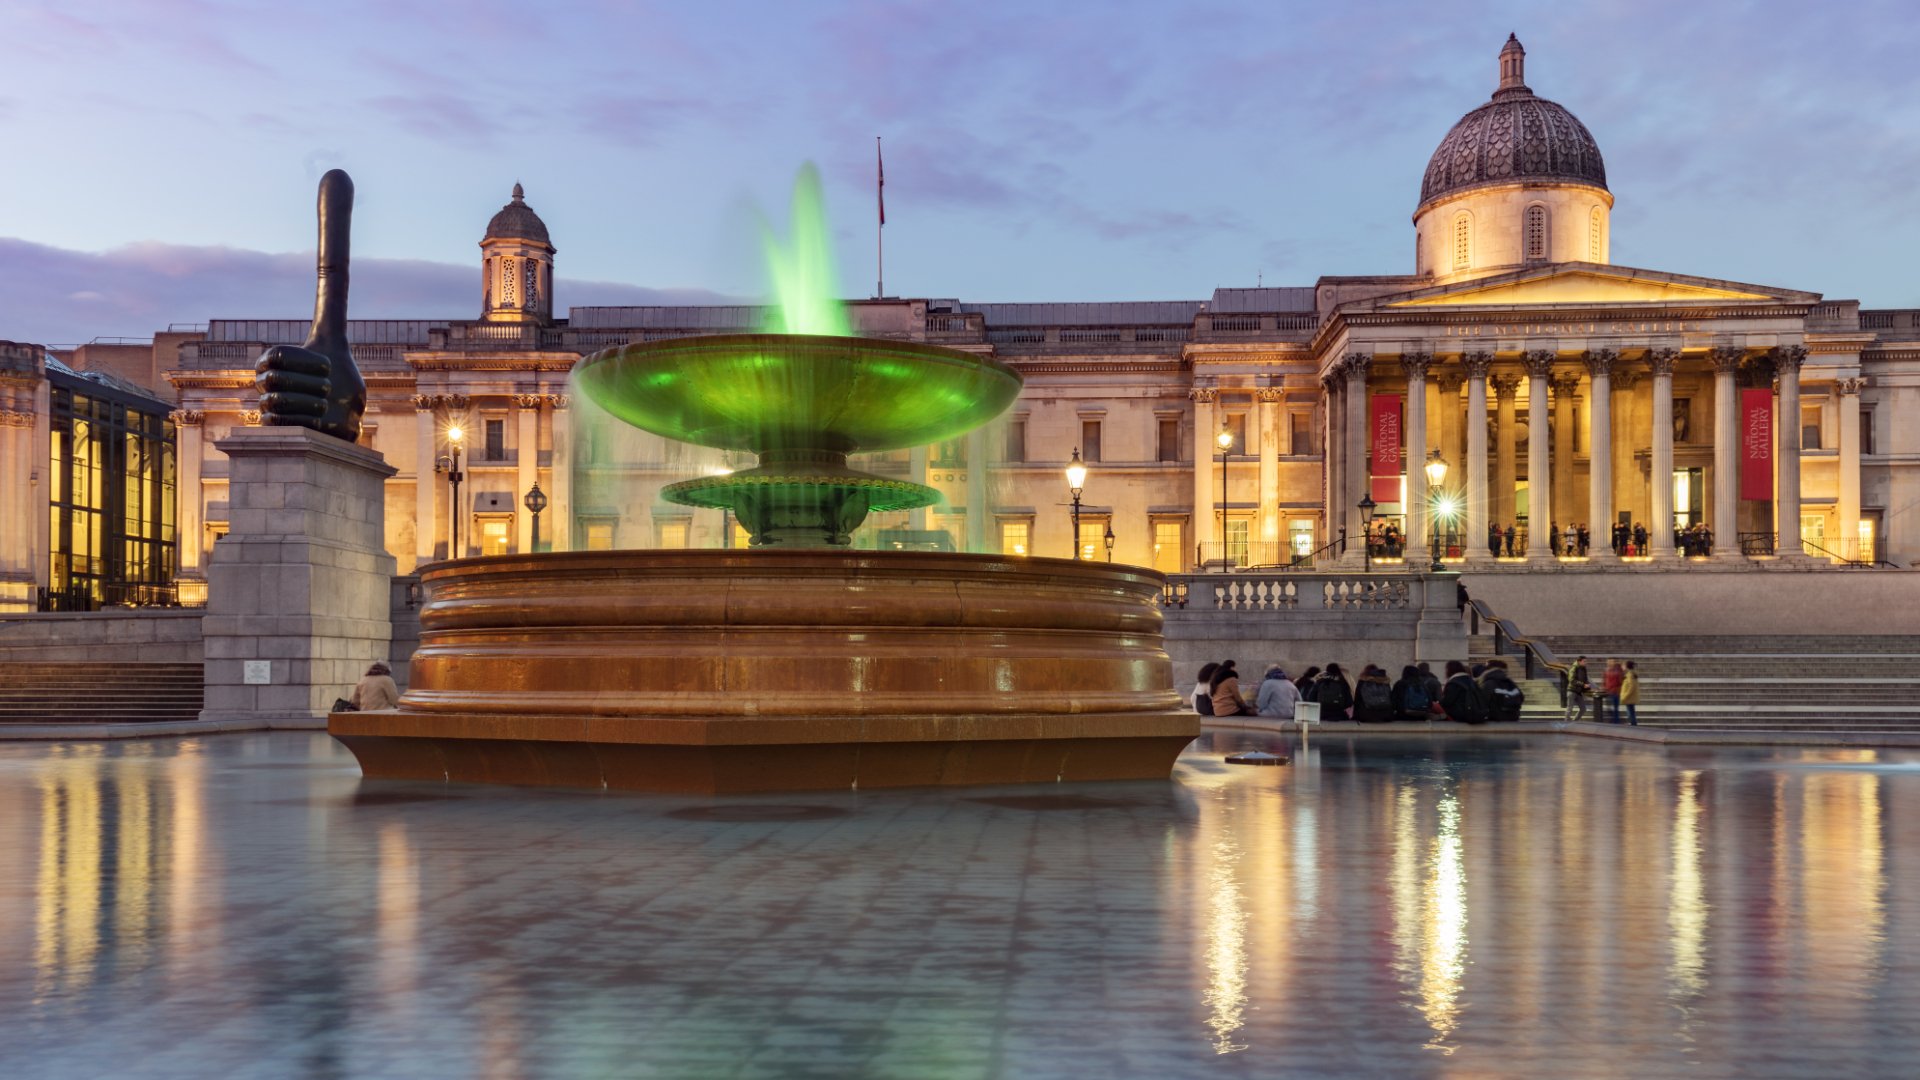 London National Gallery and Trafalgar Square and one of its fountains at dusk.